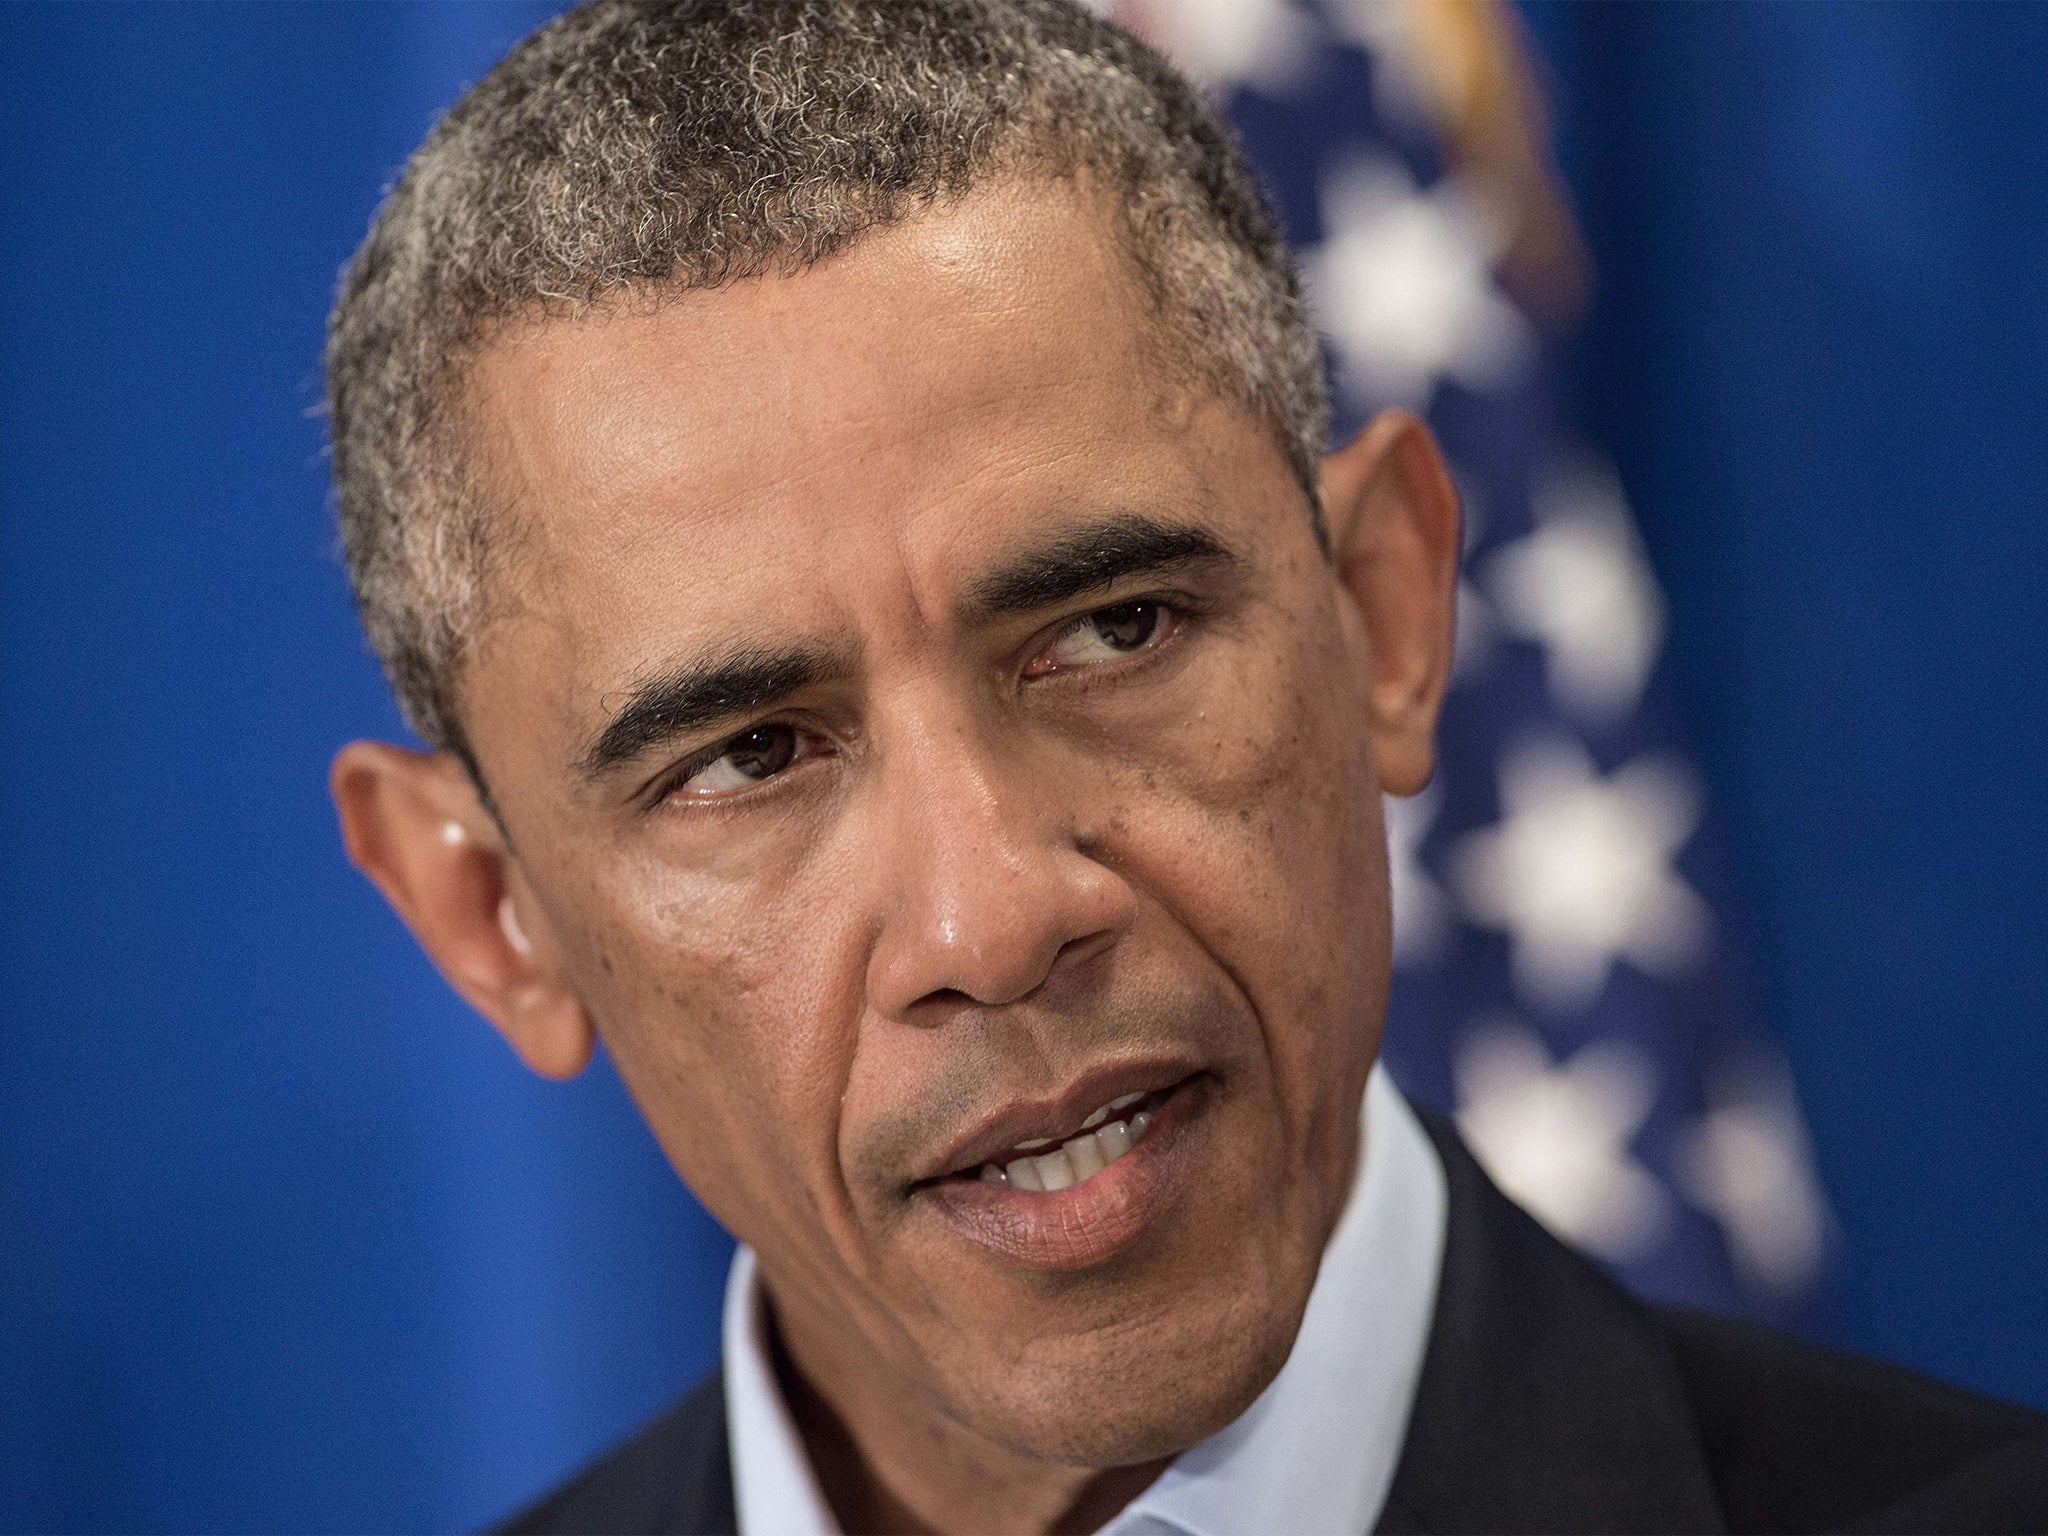 President Barack Obama makes his statement to the press